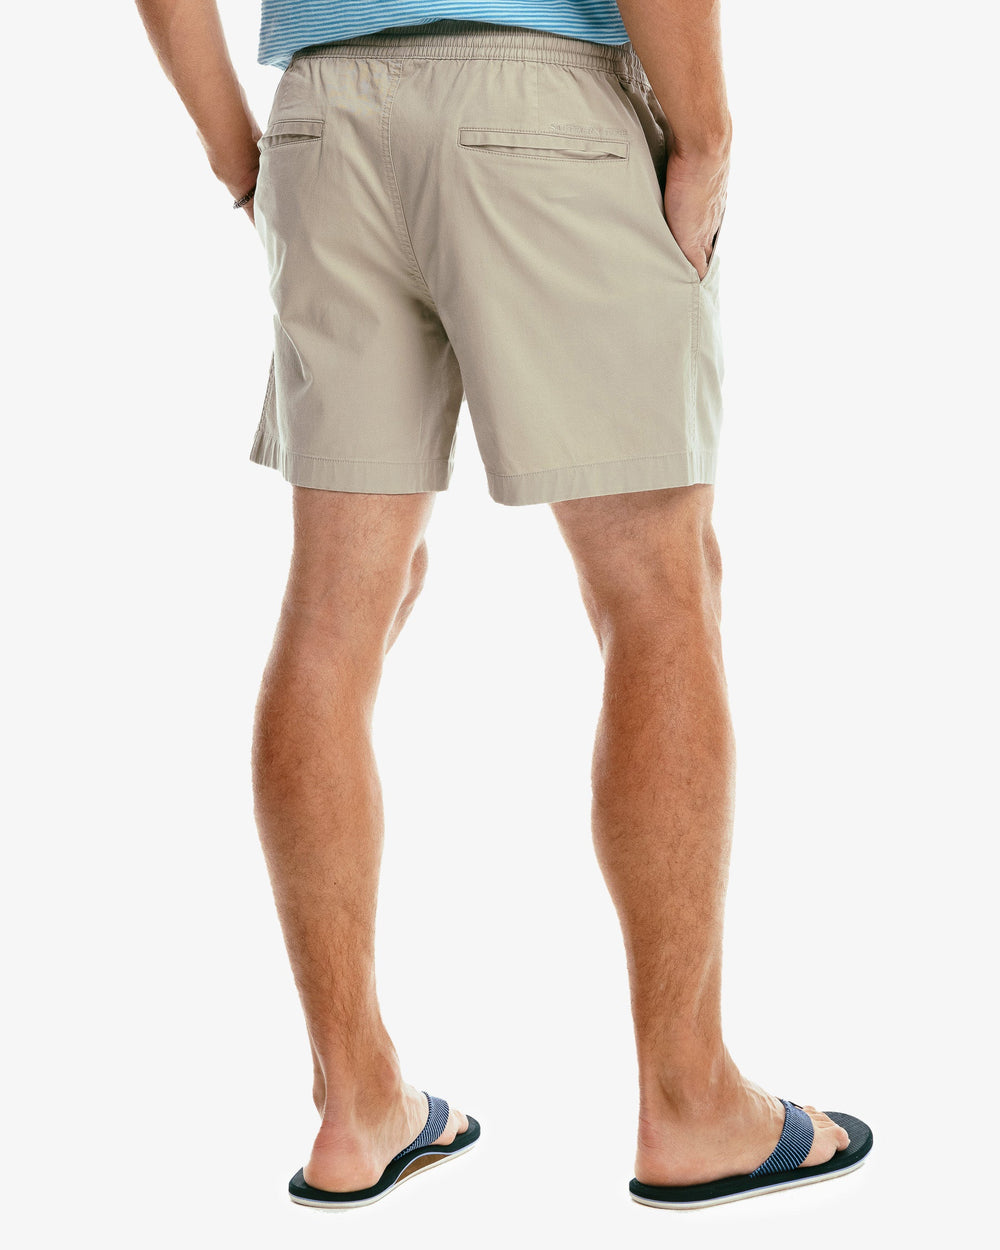 Not seeing alot of this shorter 6 inch inseam mens shorts -- men's fashion  shorts - Google Search